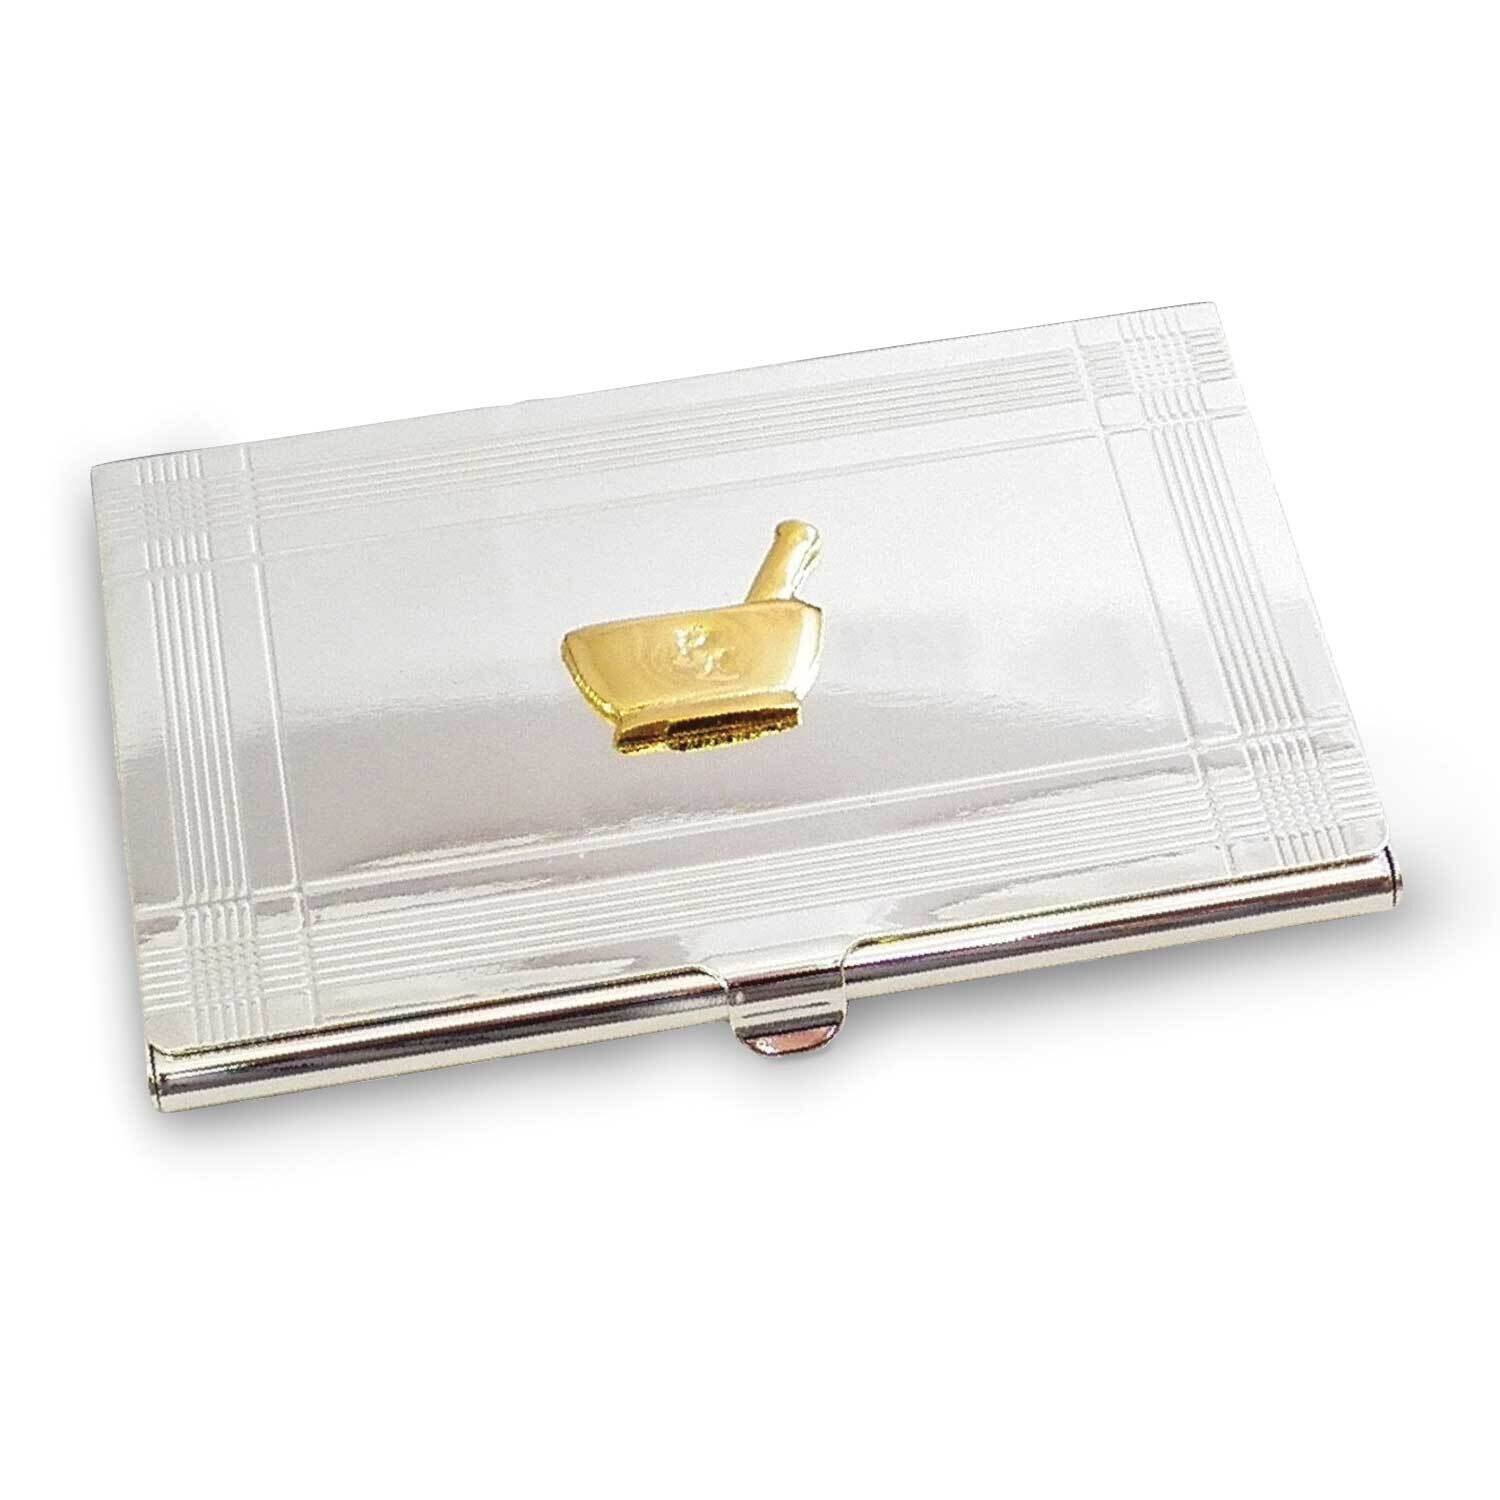 Silver-plated Business Card Case with Gold-plated Pharmacy Emblem GM21465